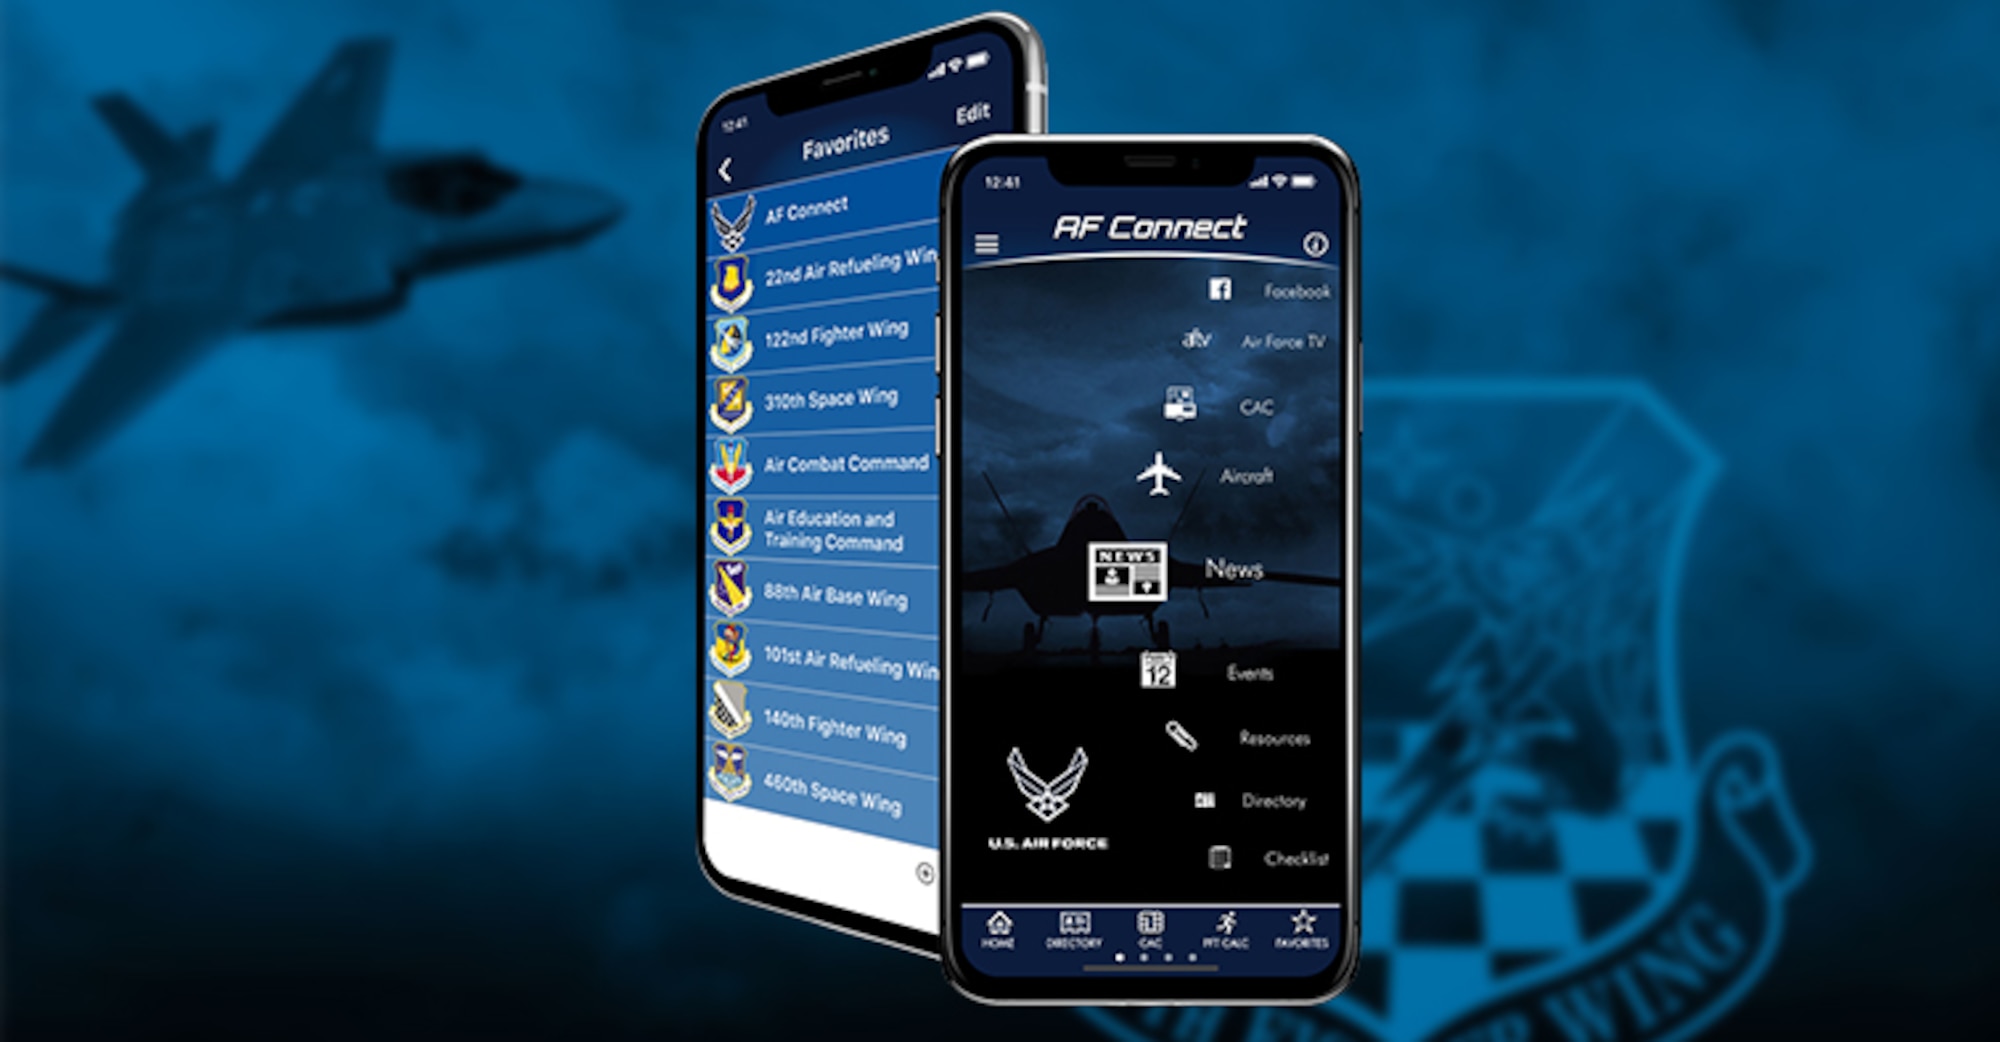 419th Fighter Wing joins the Air Force Connect mobile app